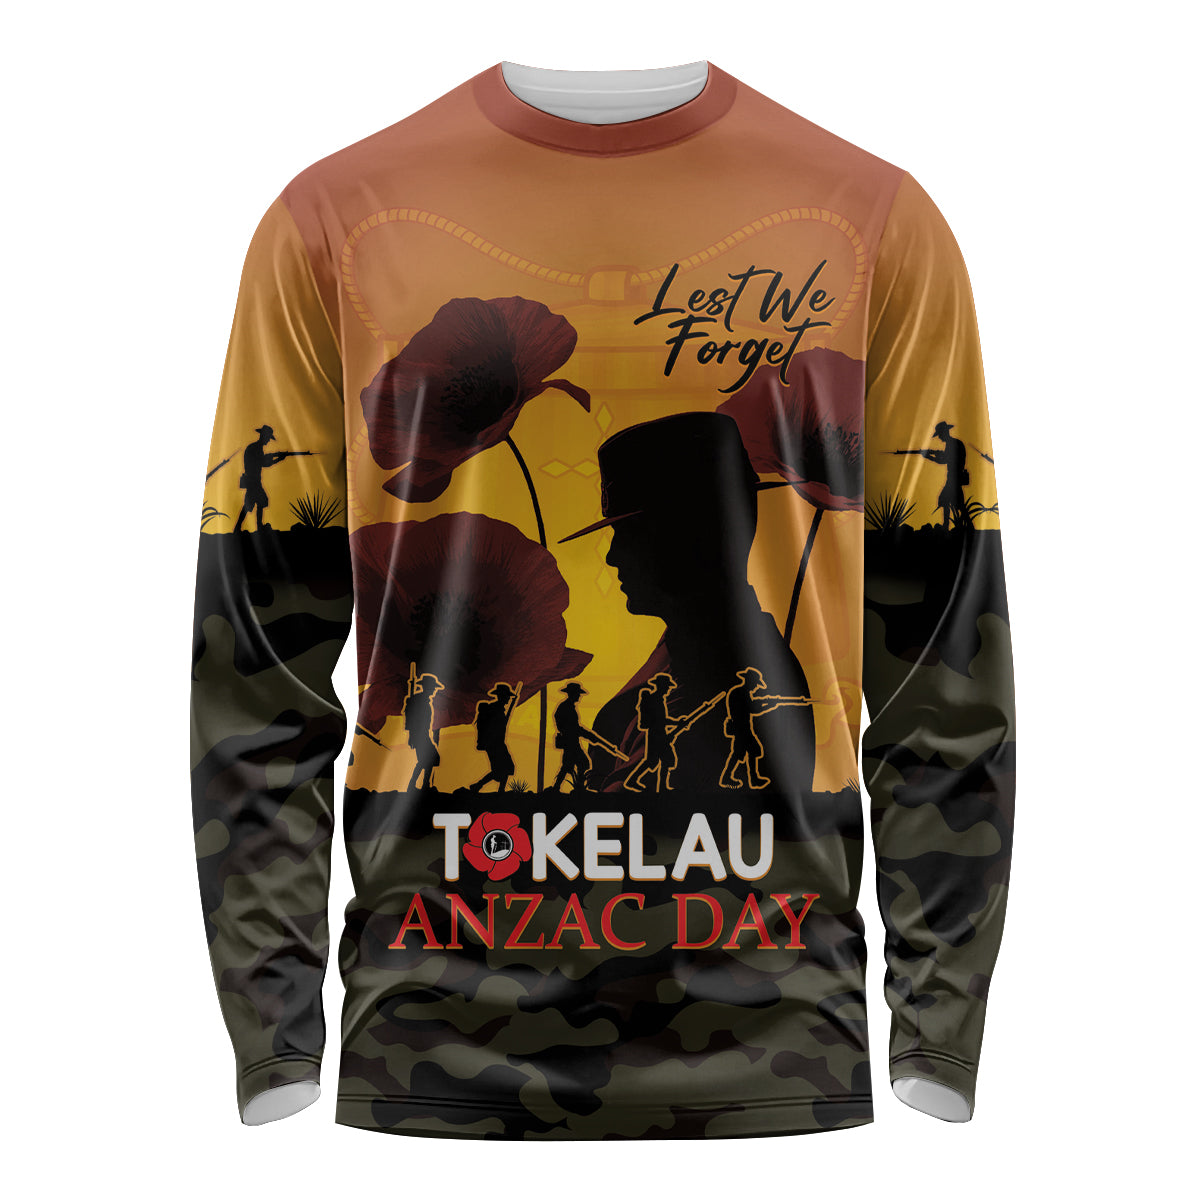 Tokelau ANZAC Day Long Sleeve Shirt Camouflage With Poppies Lest We Forget LT14 Unisex Yellow - Polynesian Pride